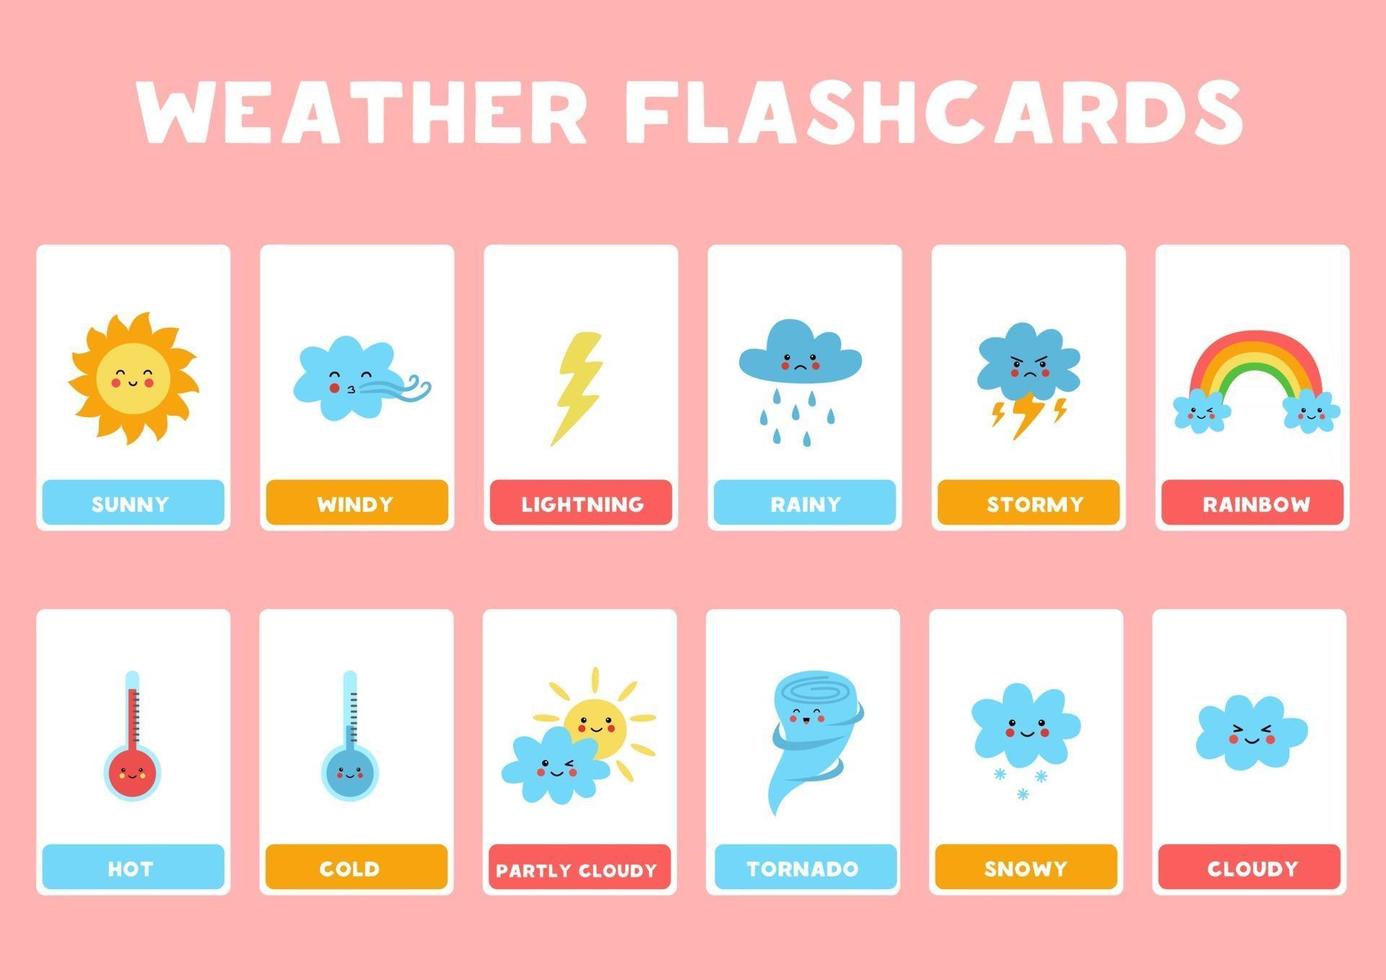 Cute weather elements with names Flash cards for children vector